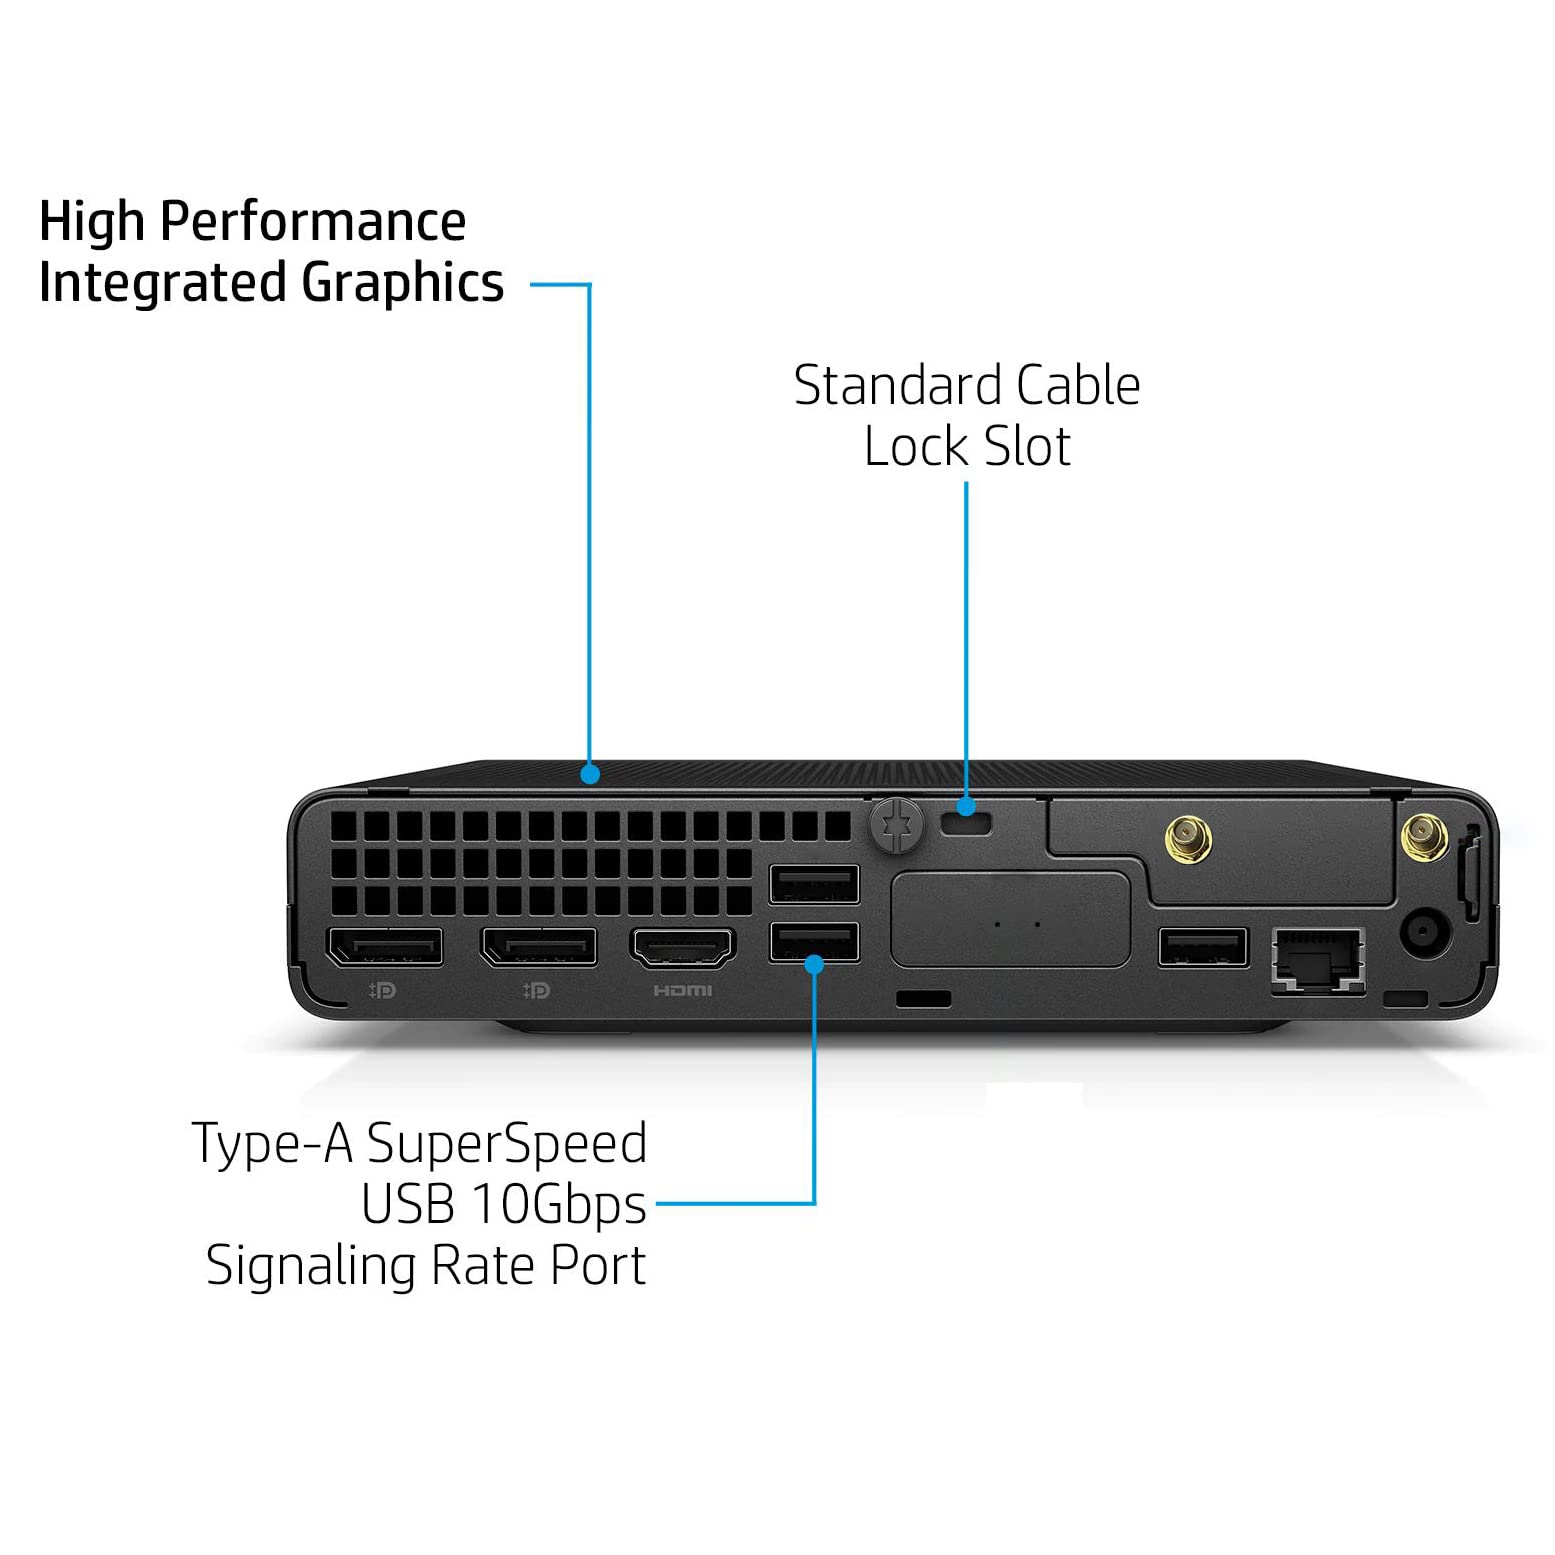 HP 2023 Elite Mini 800 G9 PC Business Desktop Computer, 12th Intel 16-Core i9-12900 up to 5.1GHz, 64GB DDR5 RAM, 2TB PCIe SSD, WiFi 6E, BT 5.2, Keyboard and Mouse, Windows 11 Pro, BROAG Cable